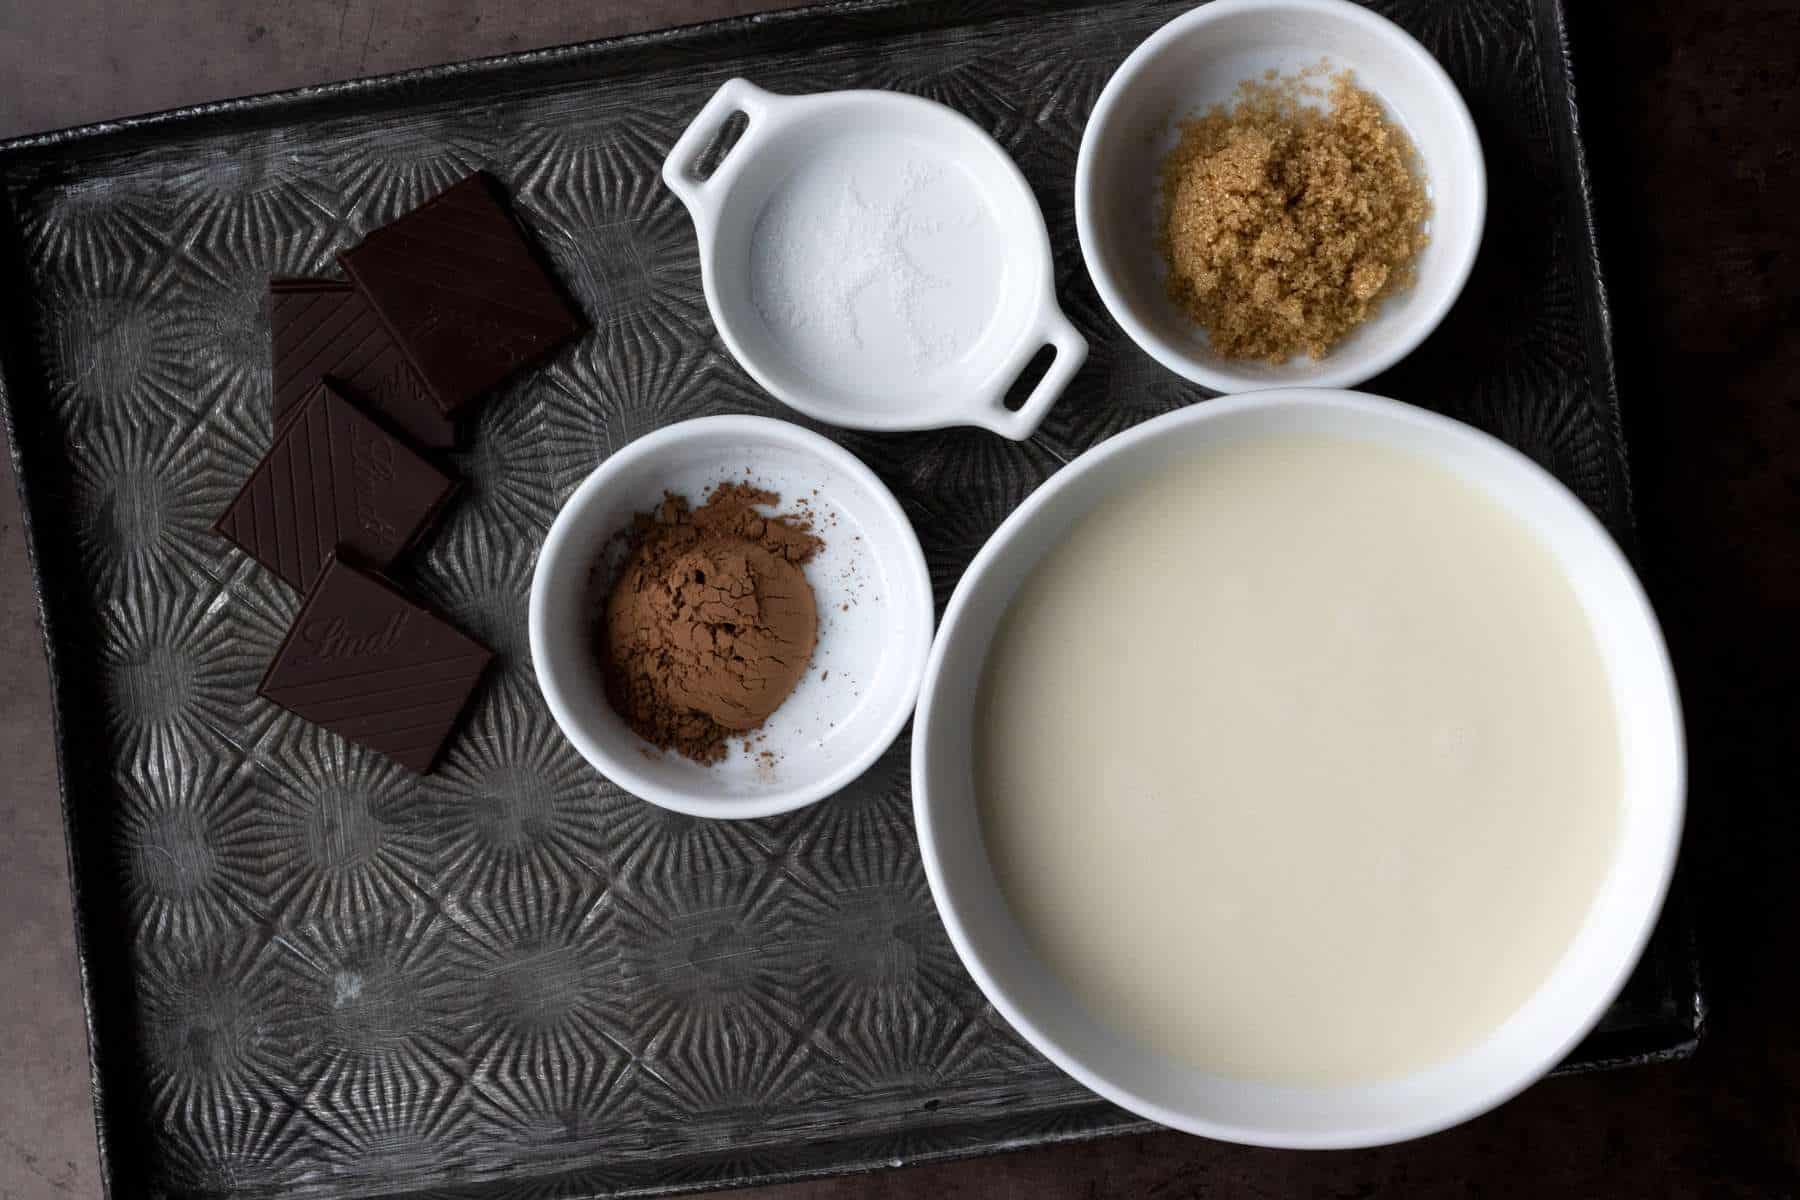 Hot chocolate ingredients on a tray.